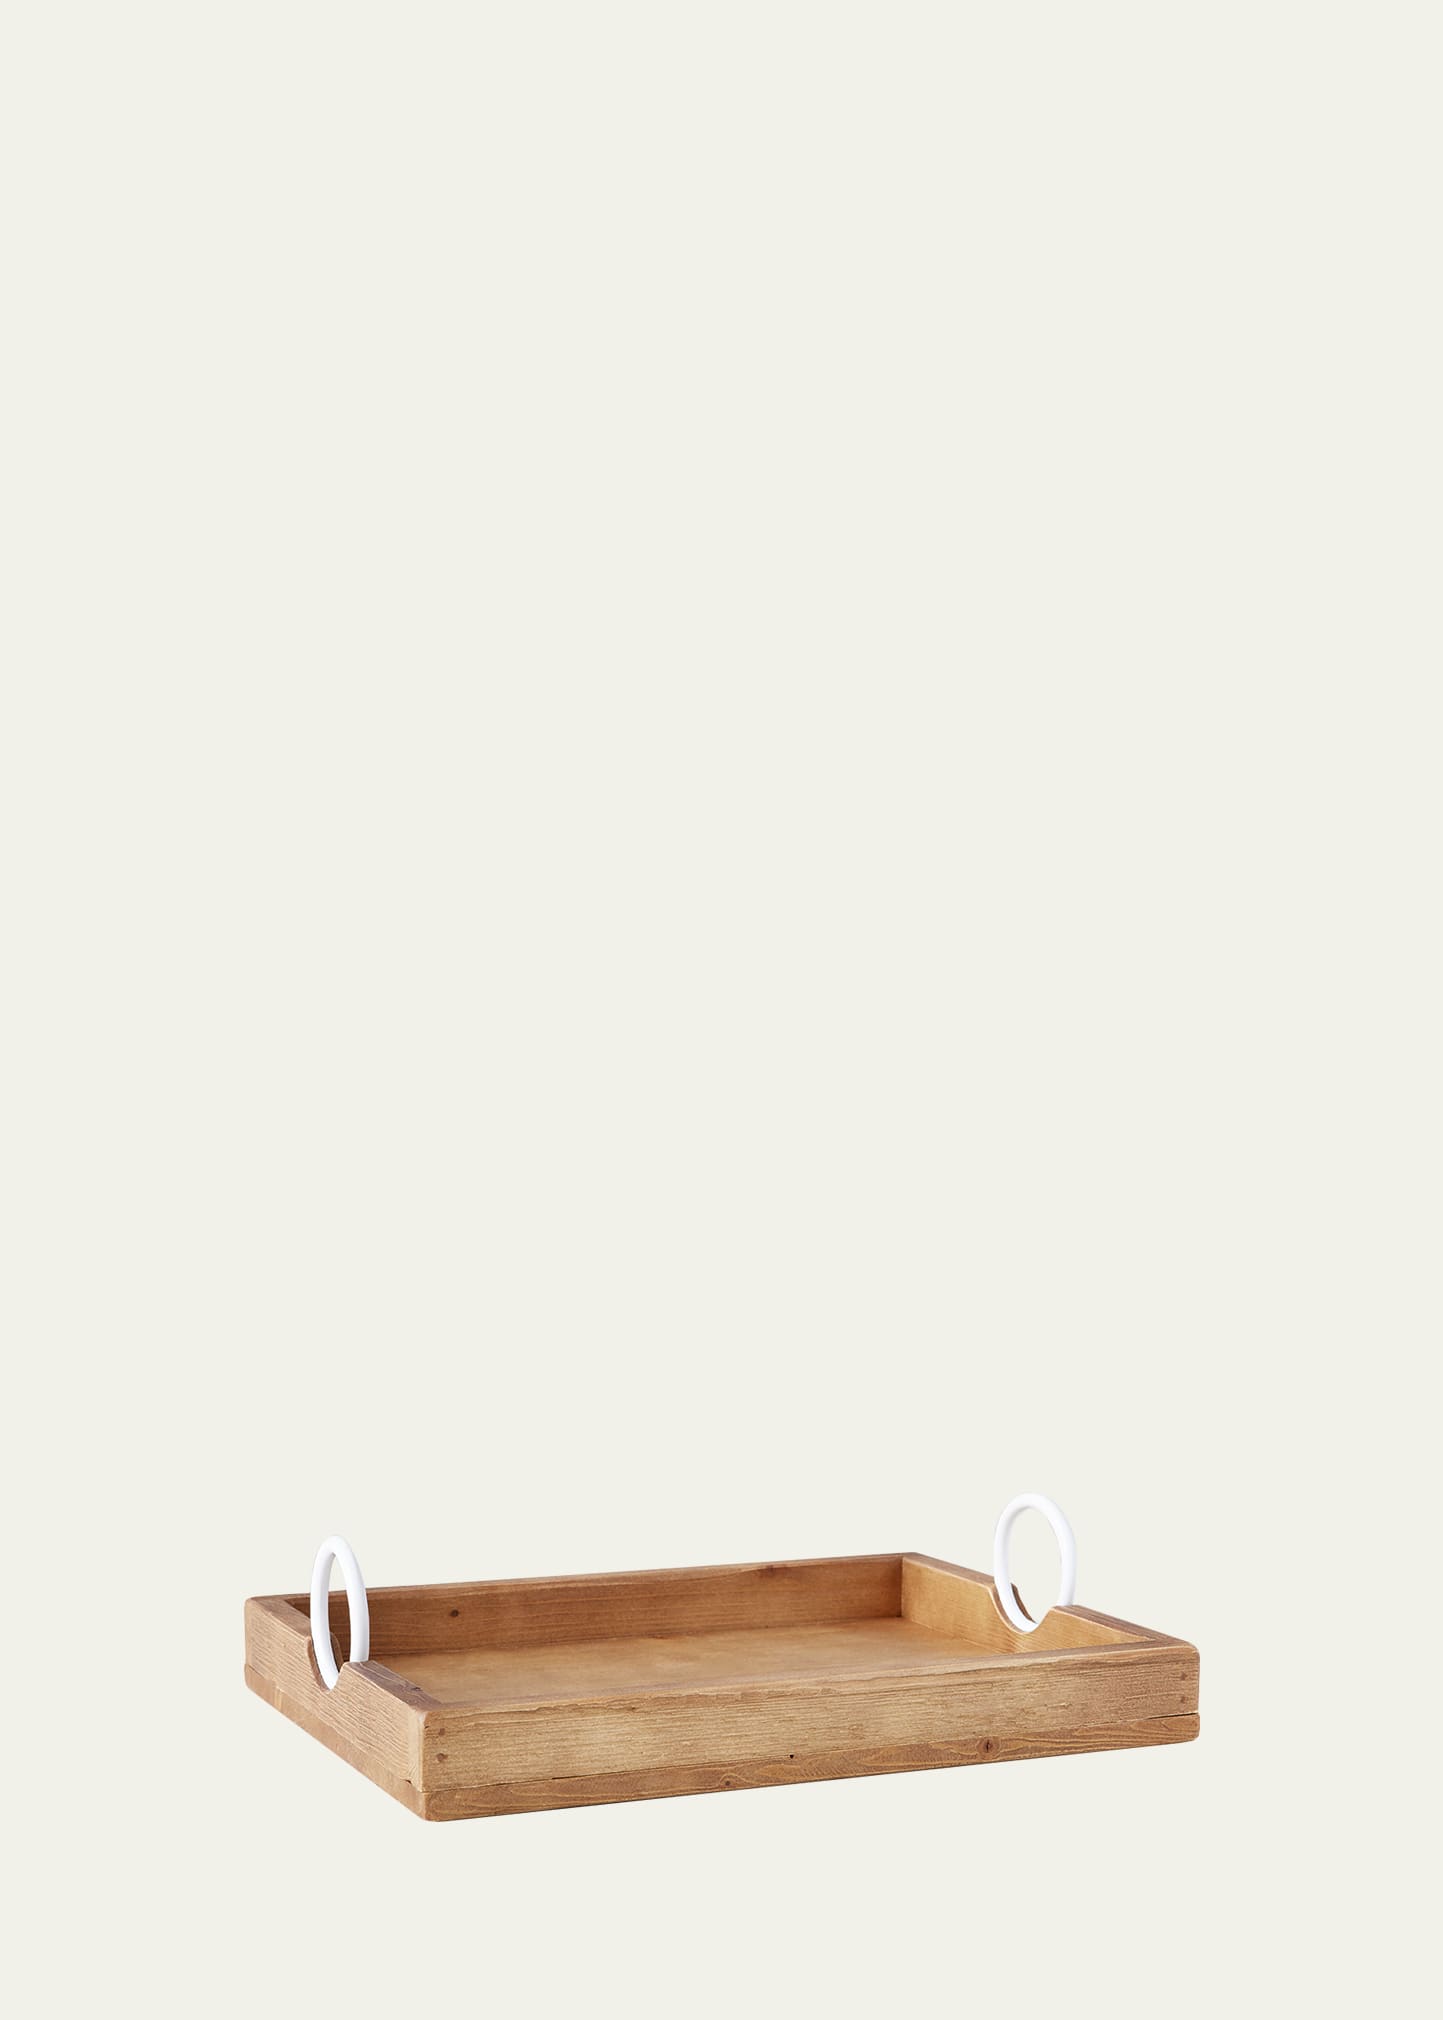 Etúhome Natural Small Rectangle Tray, 16"